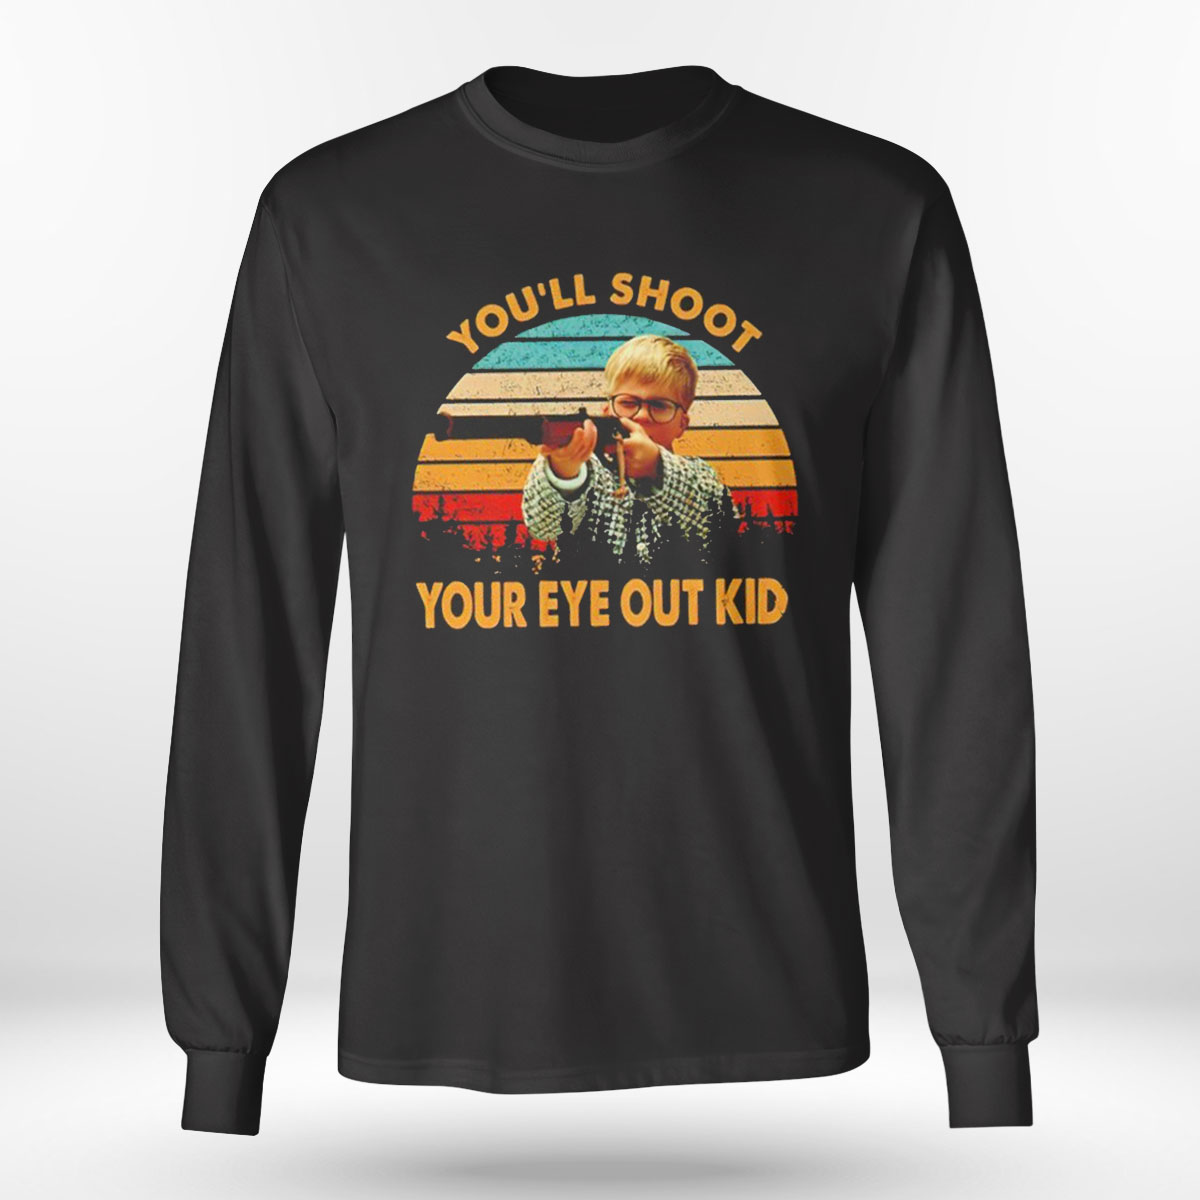 Youll Shoot Your Eye Out Kid Vintage Shirt, Ladies Tee